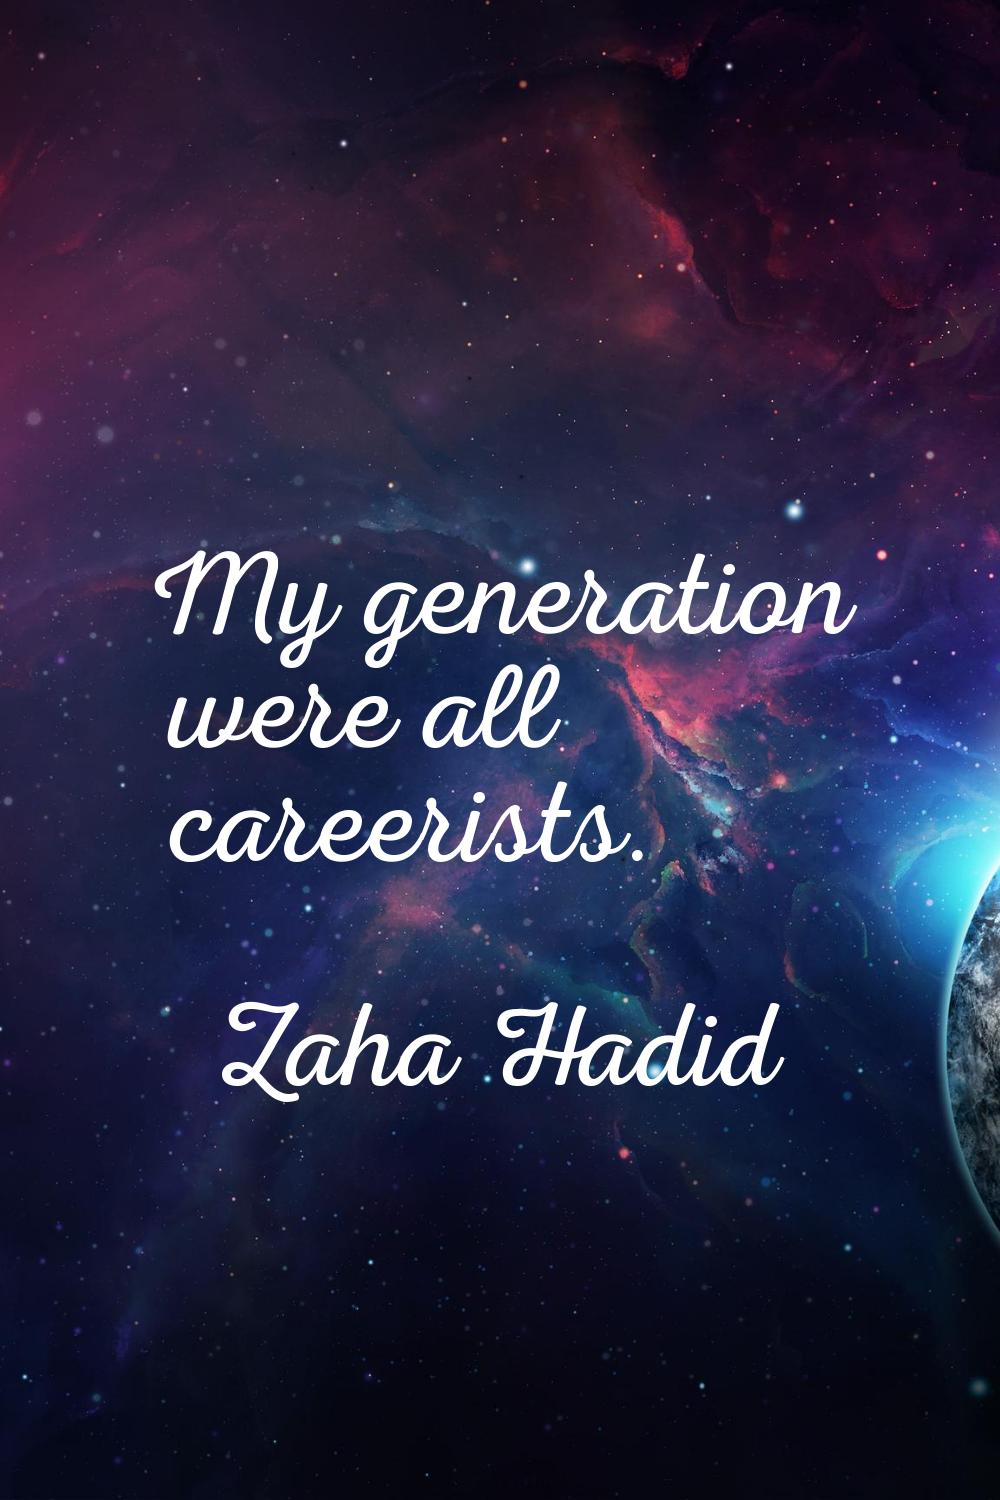 My generation were all careerists.